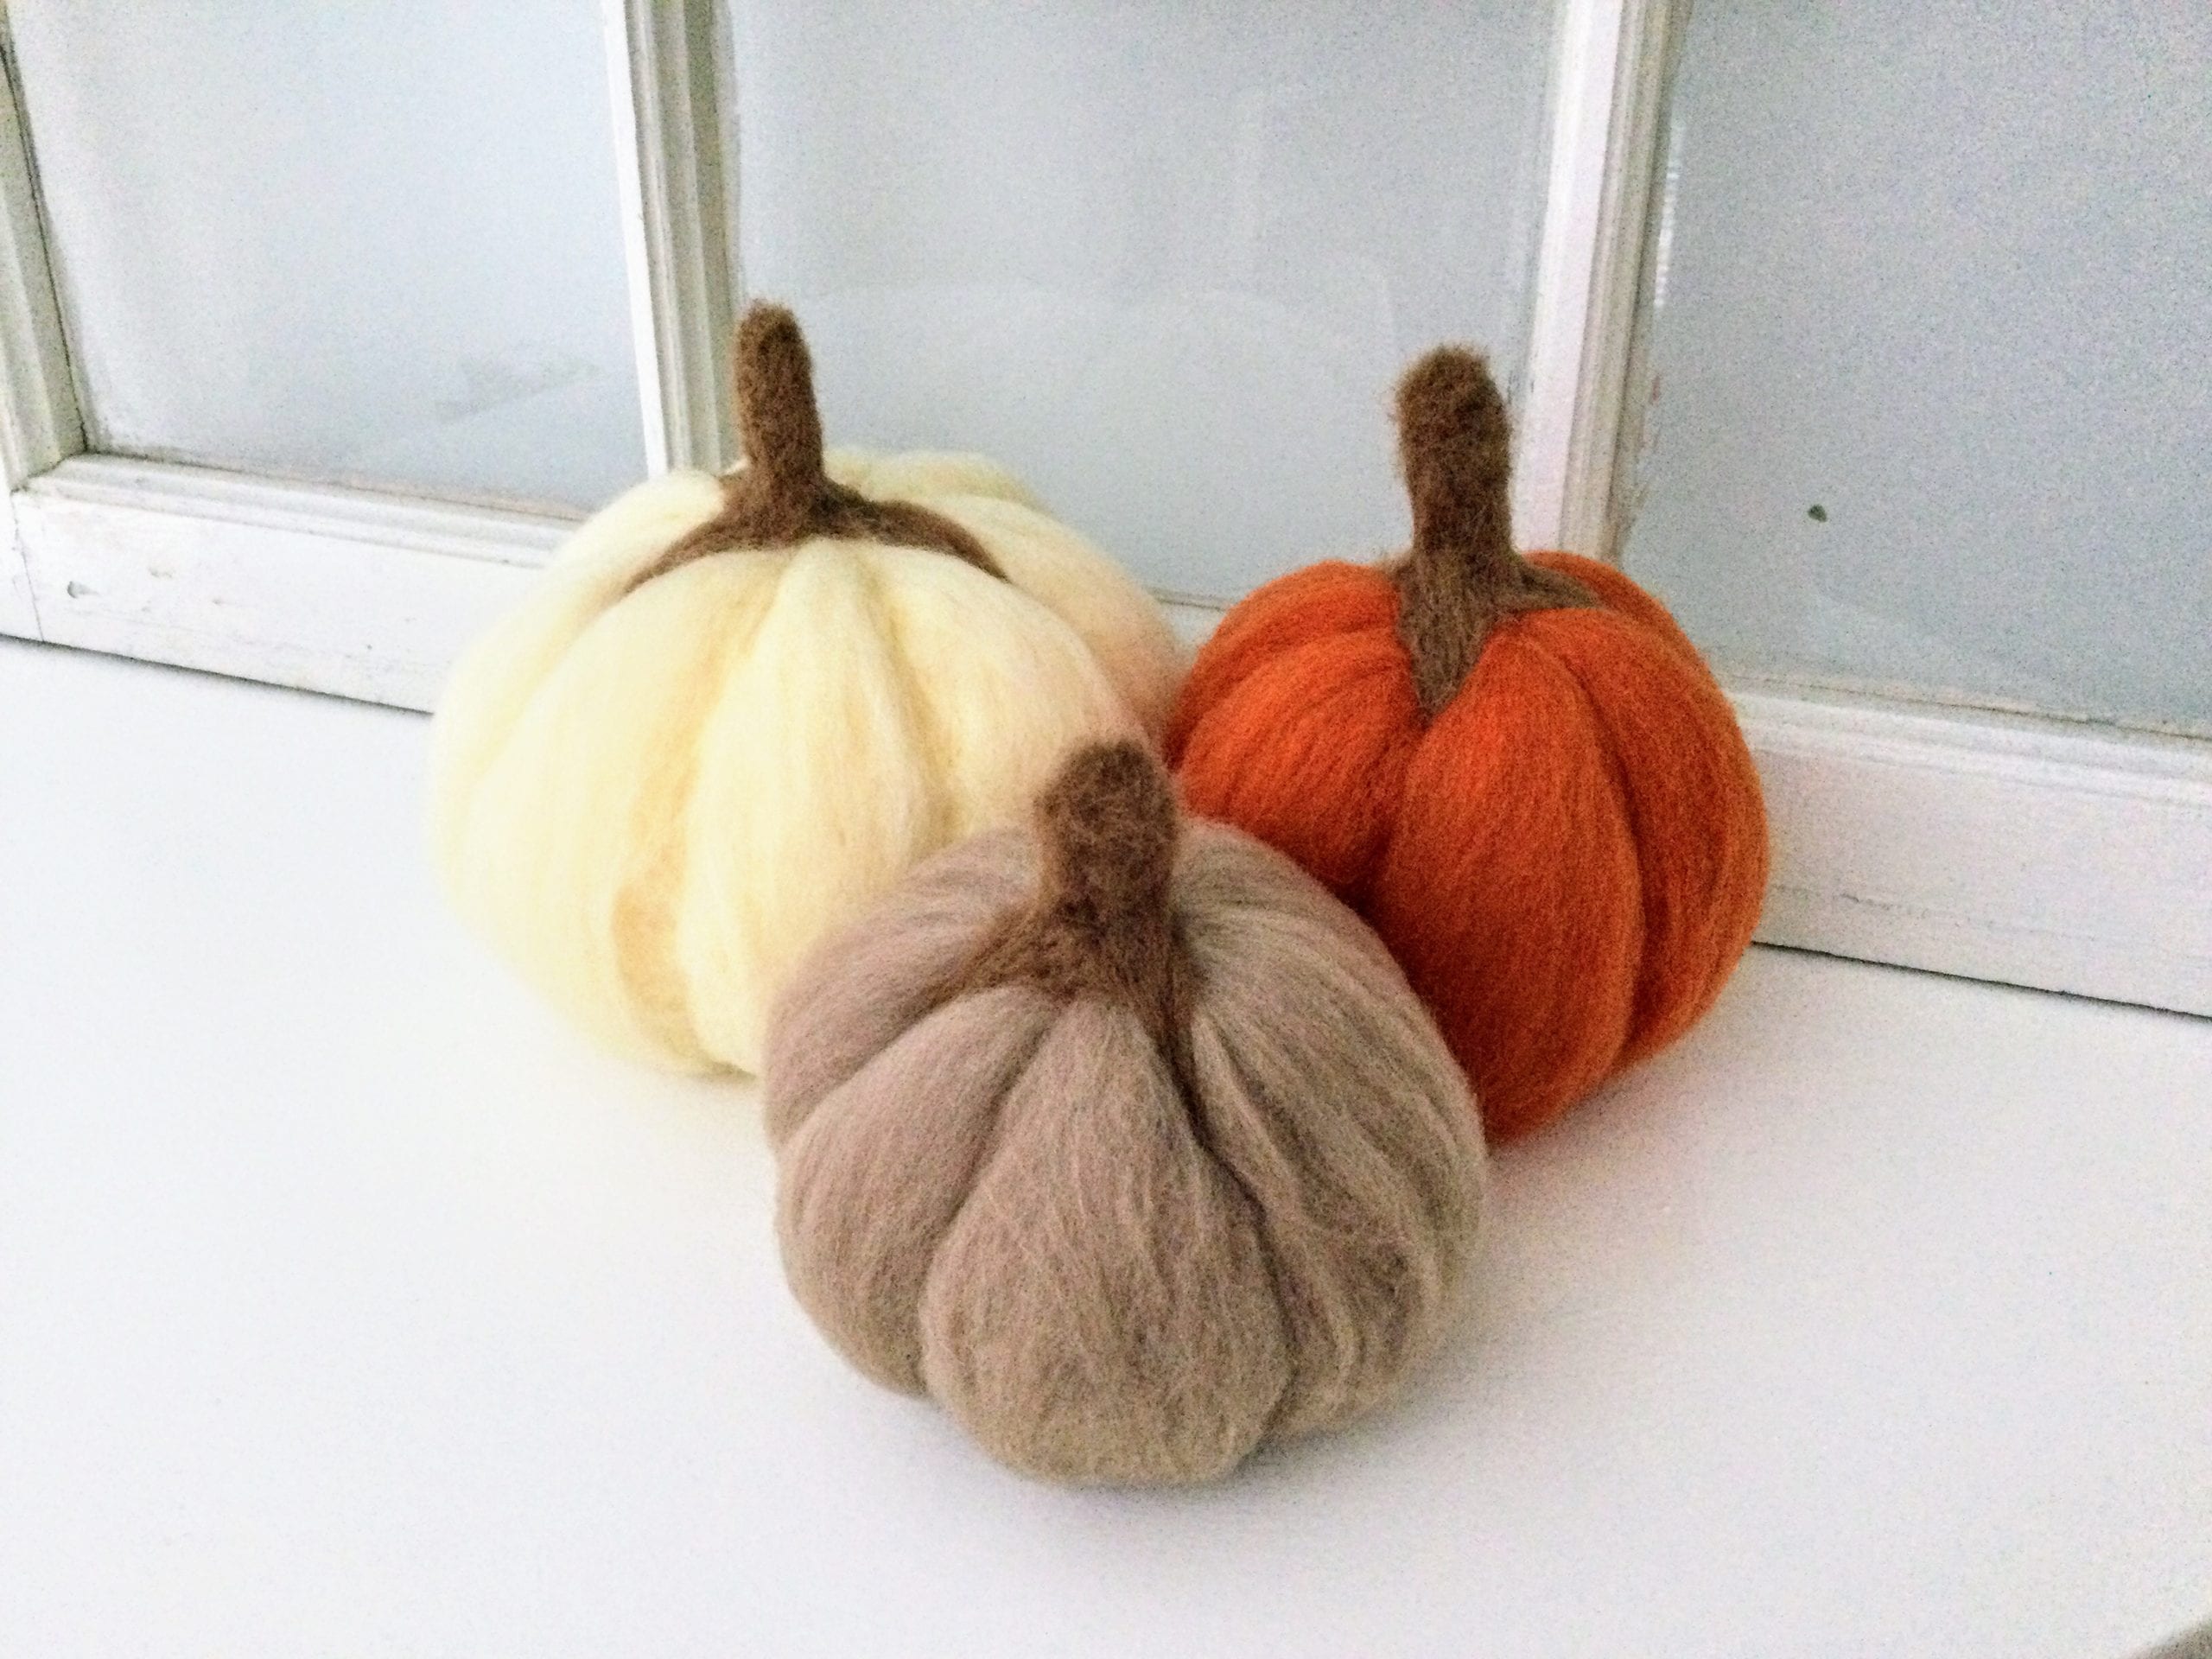 Annie’s Creative Woman Kit-of-the-Month Club… “Felted Pumpkins” Review & 50% off Coupon!